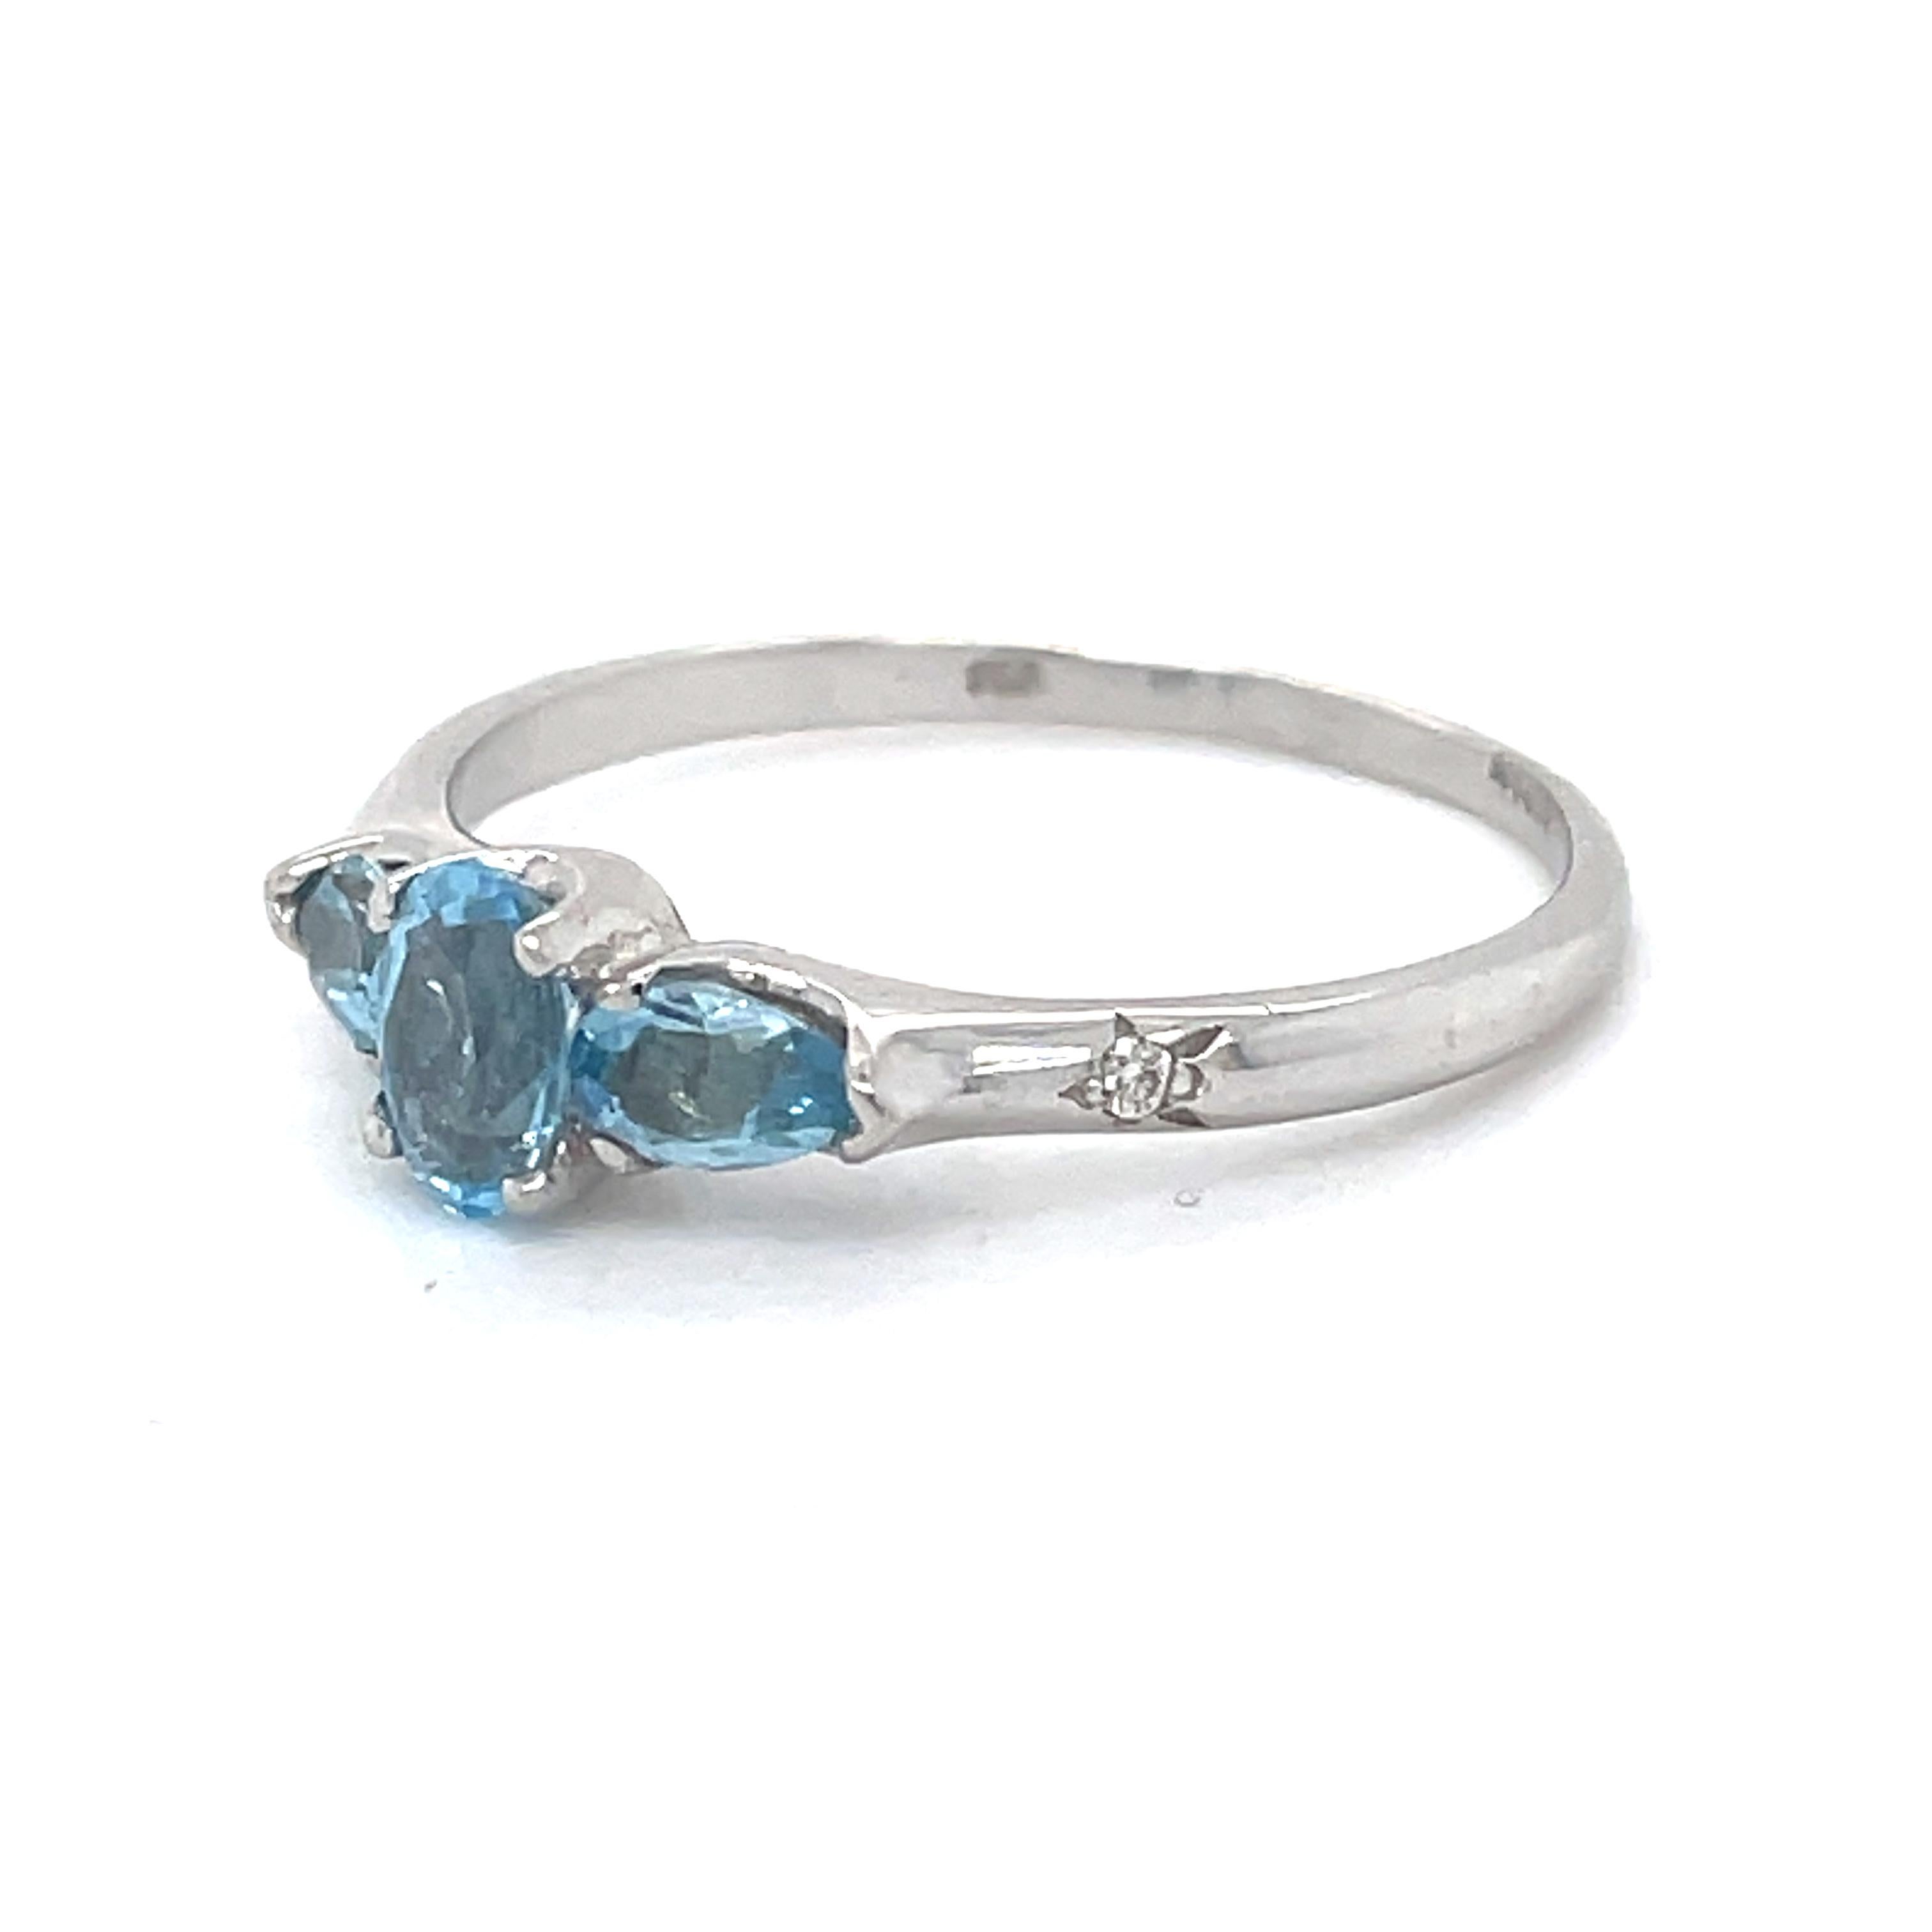 Jewelry Material:White Gold 18k (the gold has been tested by a professional)
Total Carat Weight: 1.01ct (Approx.)
Total Metal Weight: 2.7g
Size:9 US  / Diameter 18.89 mm (inner diameter)

Grading Results:
Stone Type: Blue Topaz
Shape: Oval +